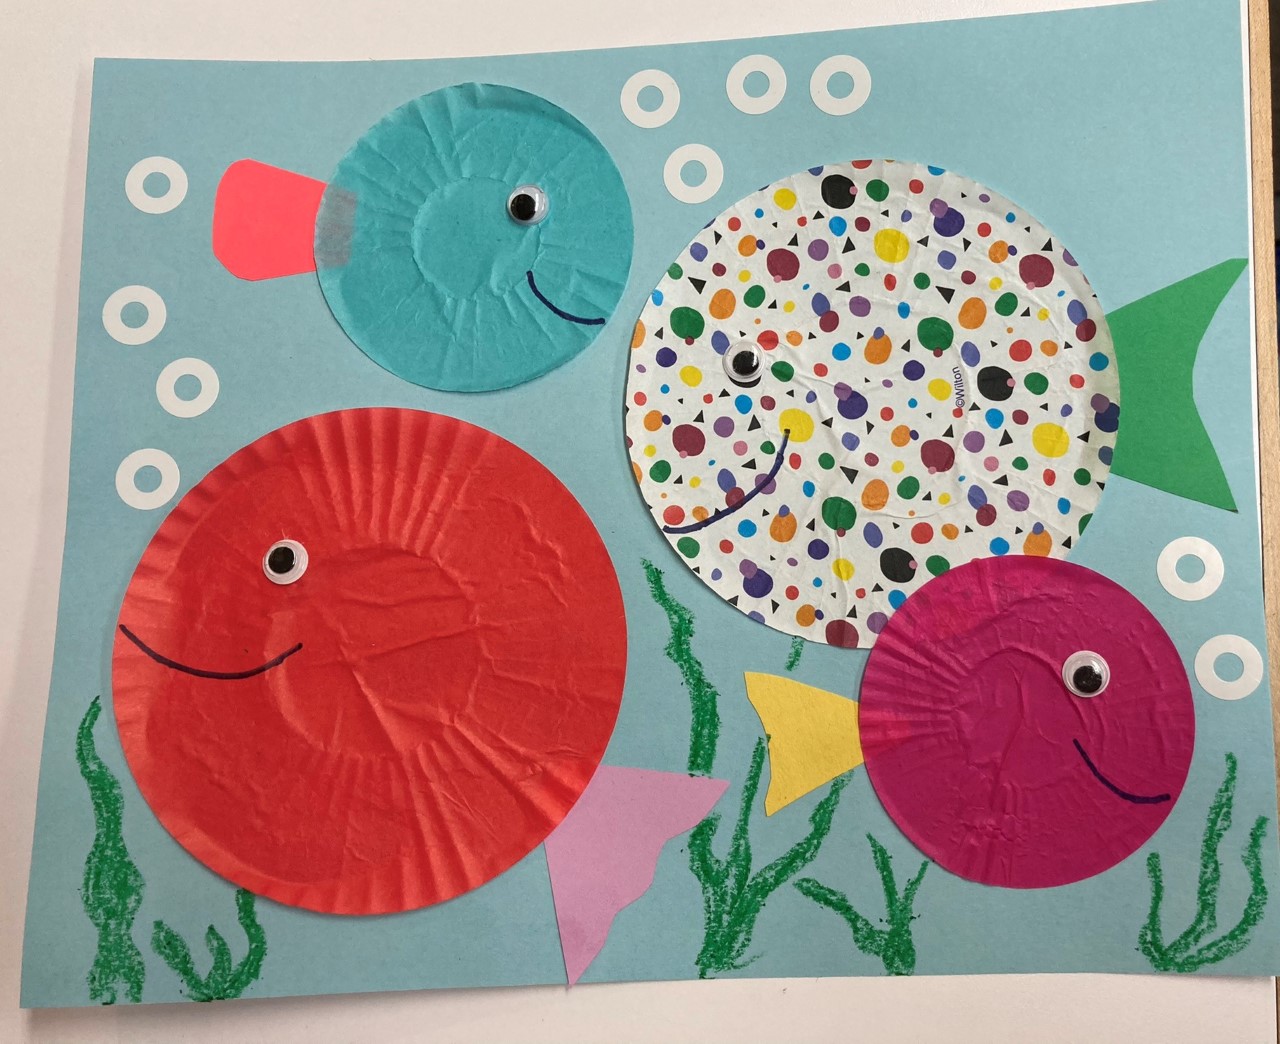 colourful fish made of cupcake liners